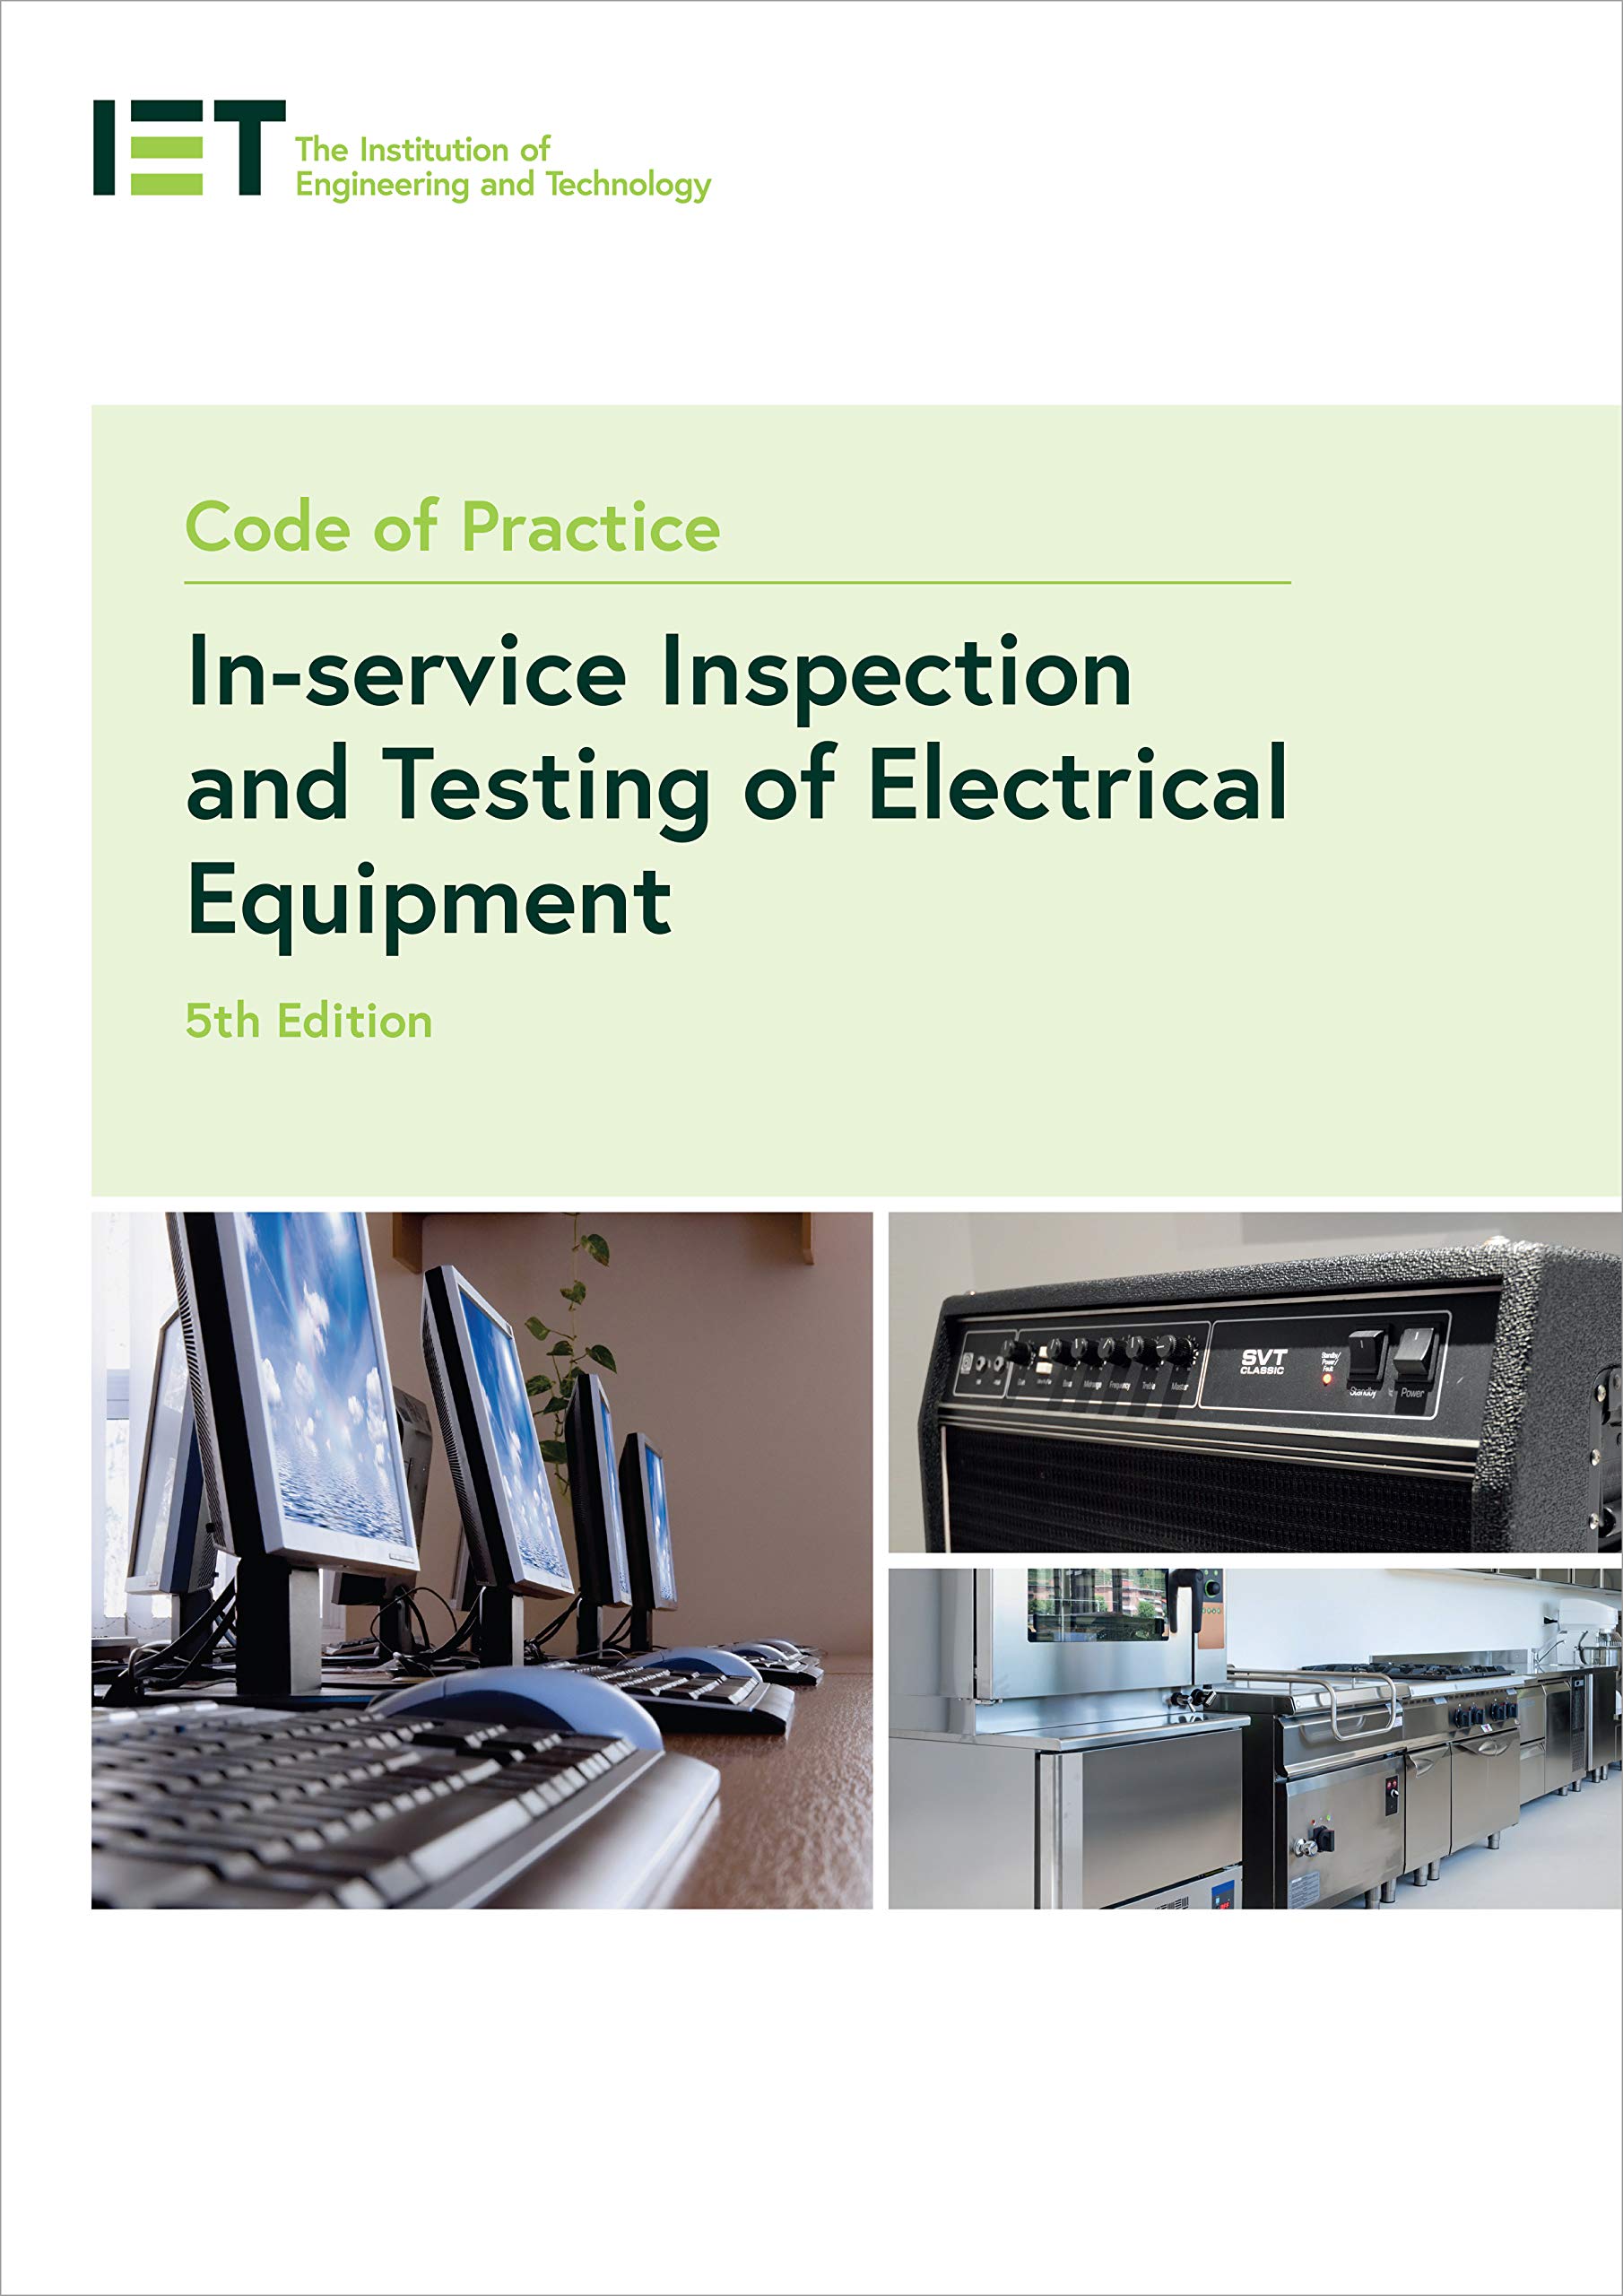 Code of Practice In-Service Inspection and Testing of Electrical Equipment, 5th Edition